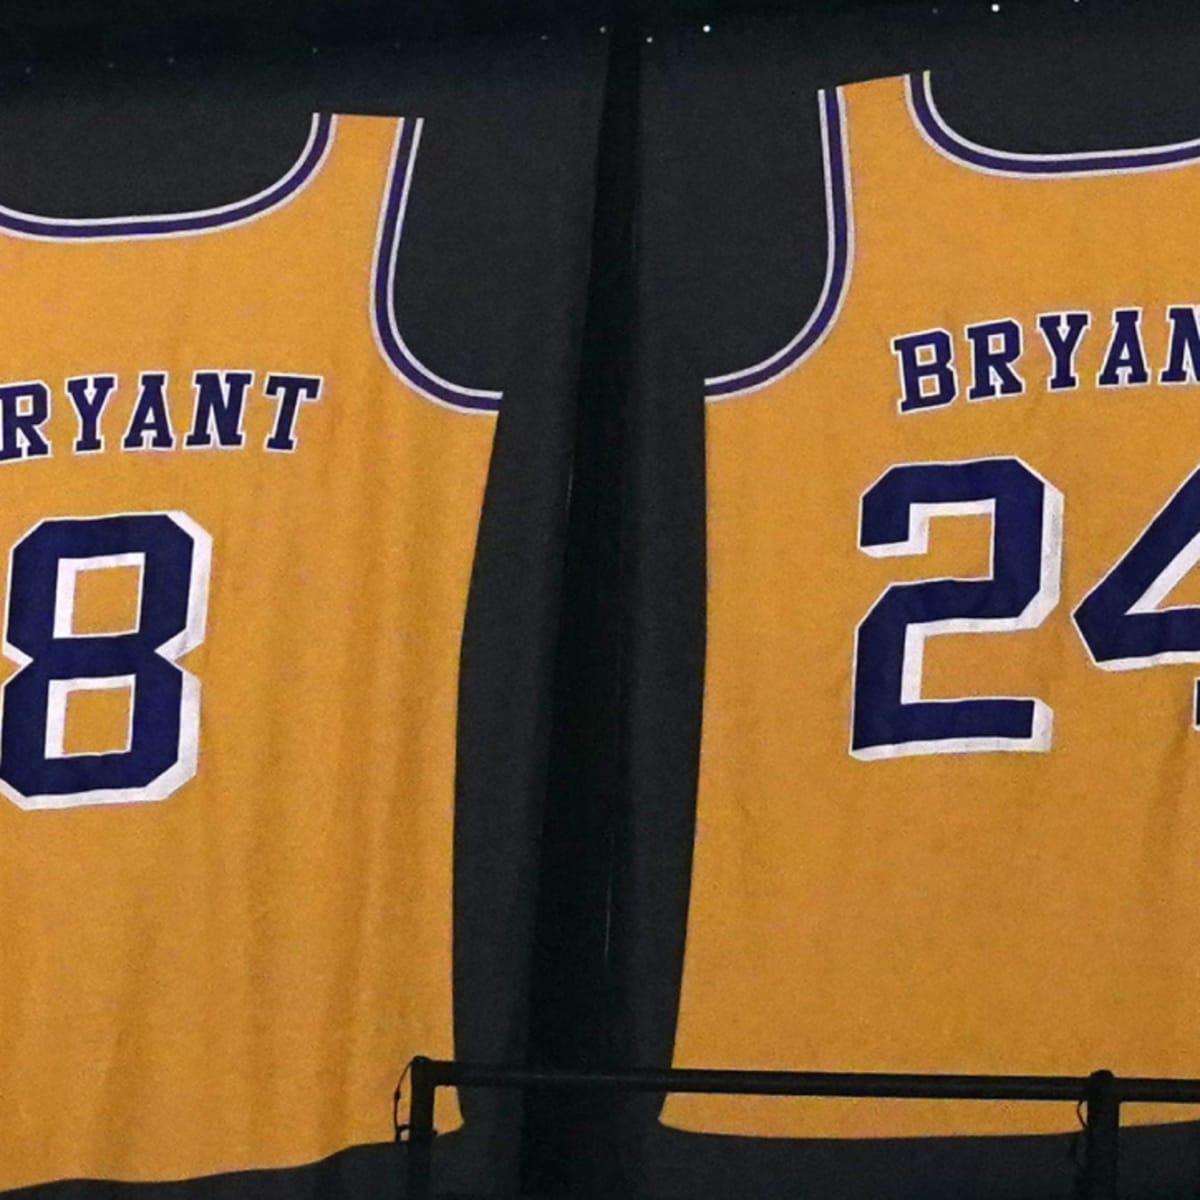 Ciara celebrates Kobe Bryant's memory in custom jersey and sneakers  designed for his daughter Gianna after LA Lakers announce the  significant date the statue of late NBA legend will be unveiled